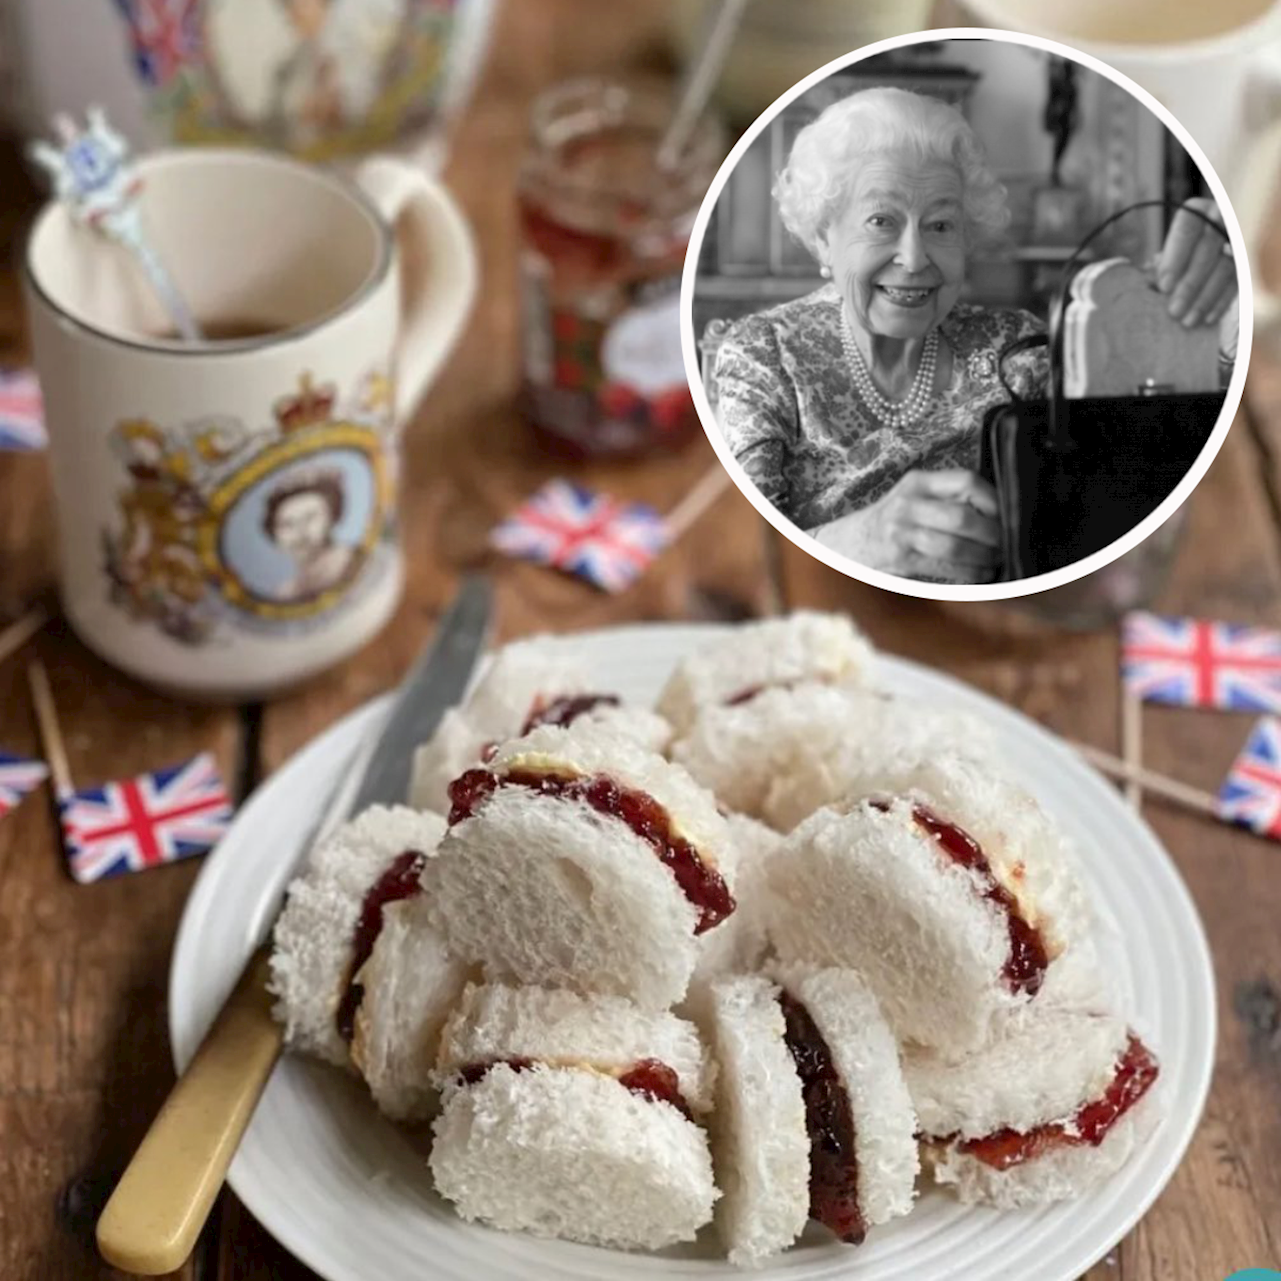 Today you could make the Queen's favorite jam pennies. Here is the recipe